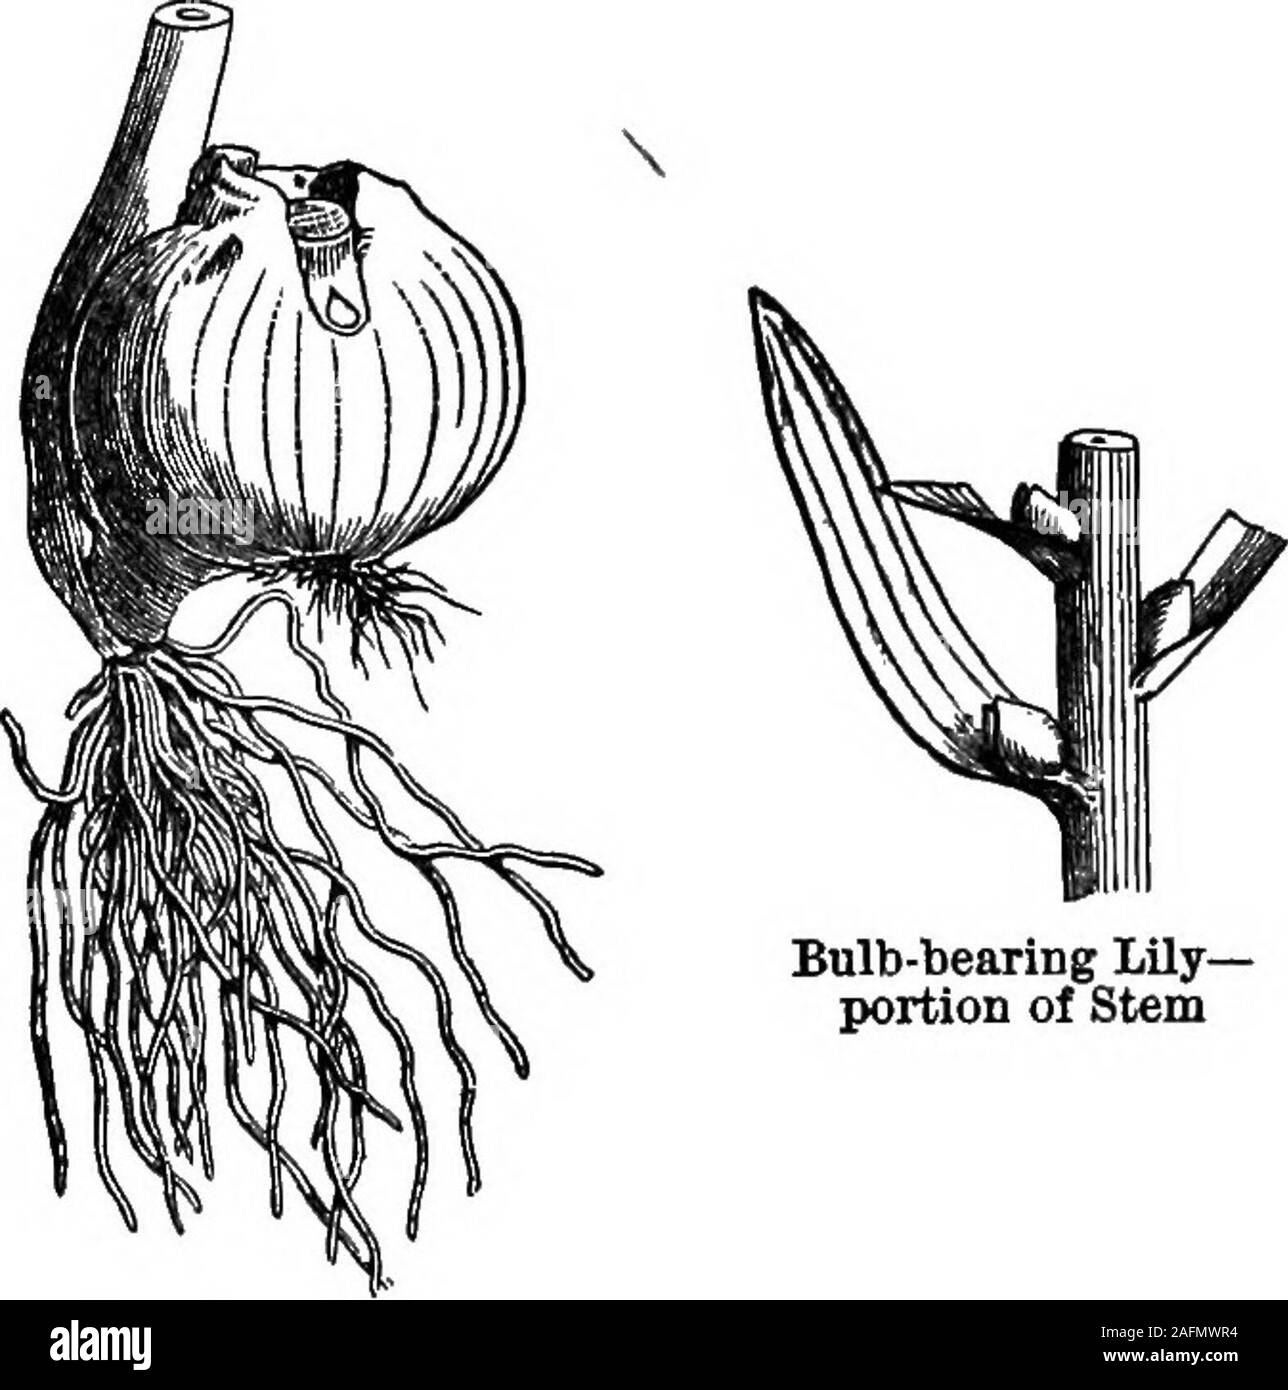 The standard cyclopedia of modern agriculture and rural economy, by the  most distinguished authorities and specialists under the editorship of  Professor R. Patrick Wright ... Idly—Scaly Bulb Onion—Tunicated Bnlb. Bulb-bearing  Lily-portion